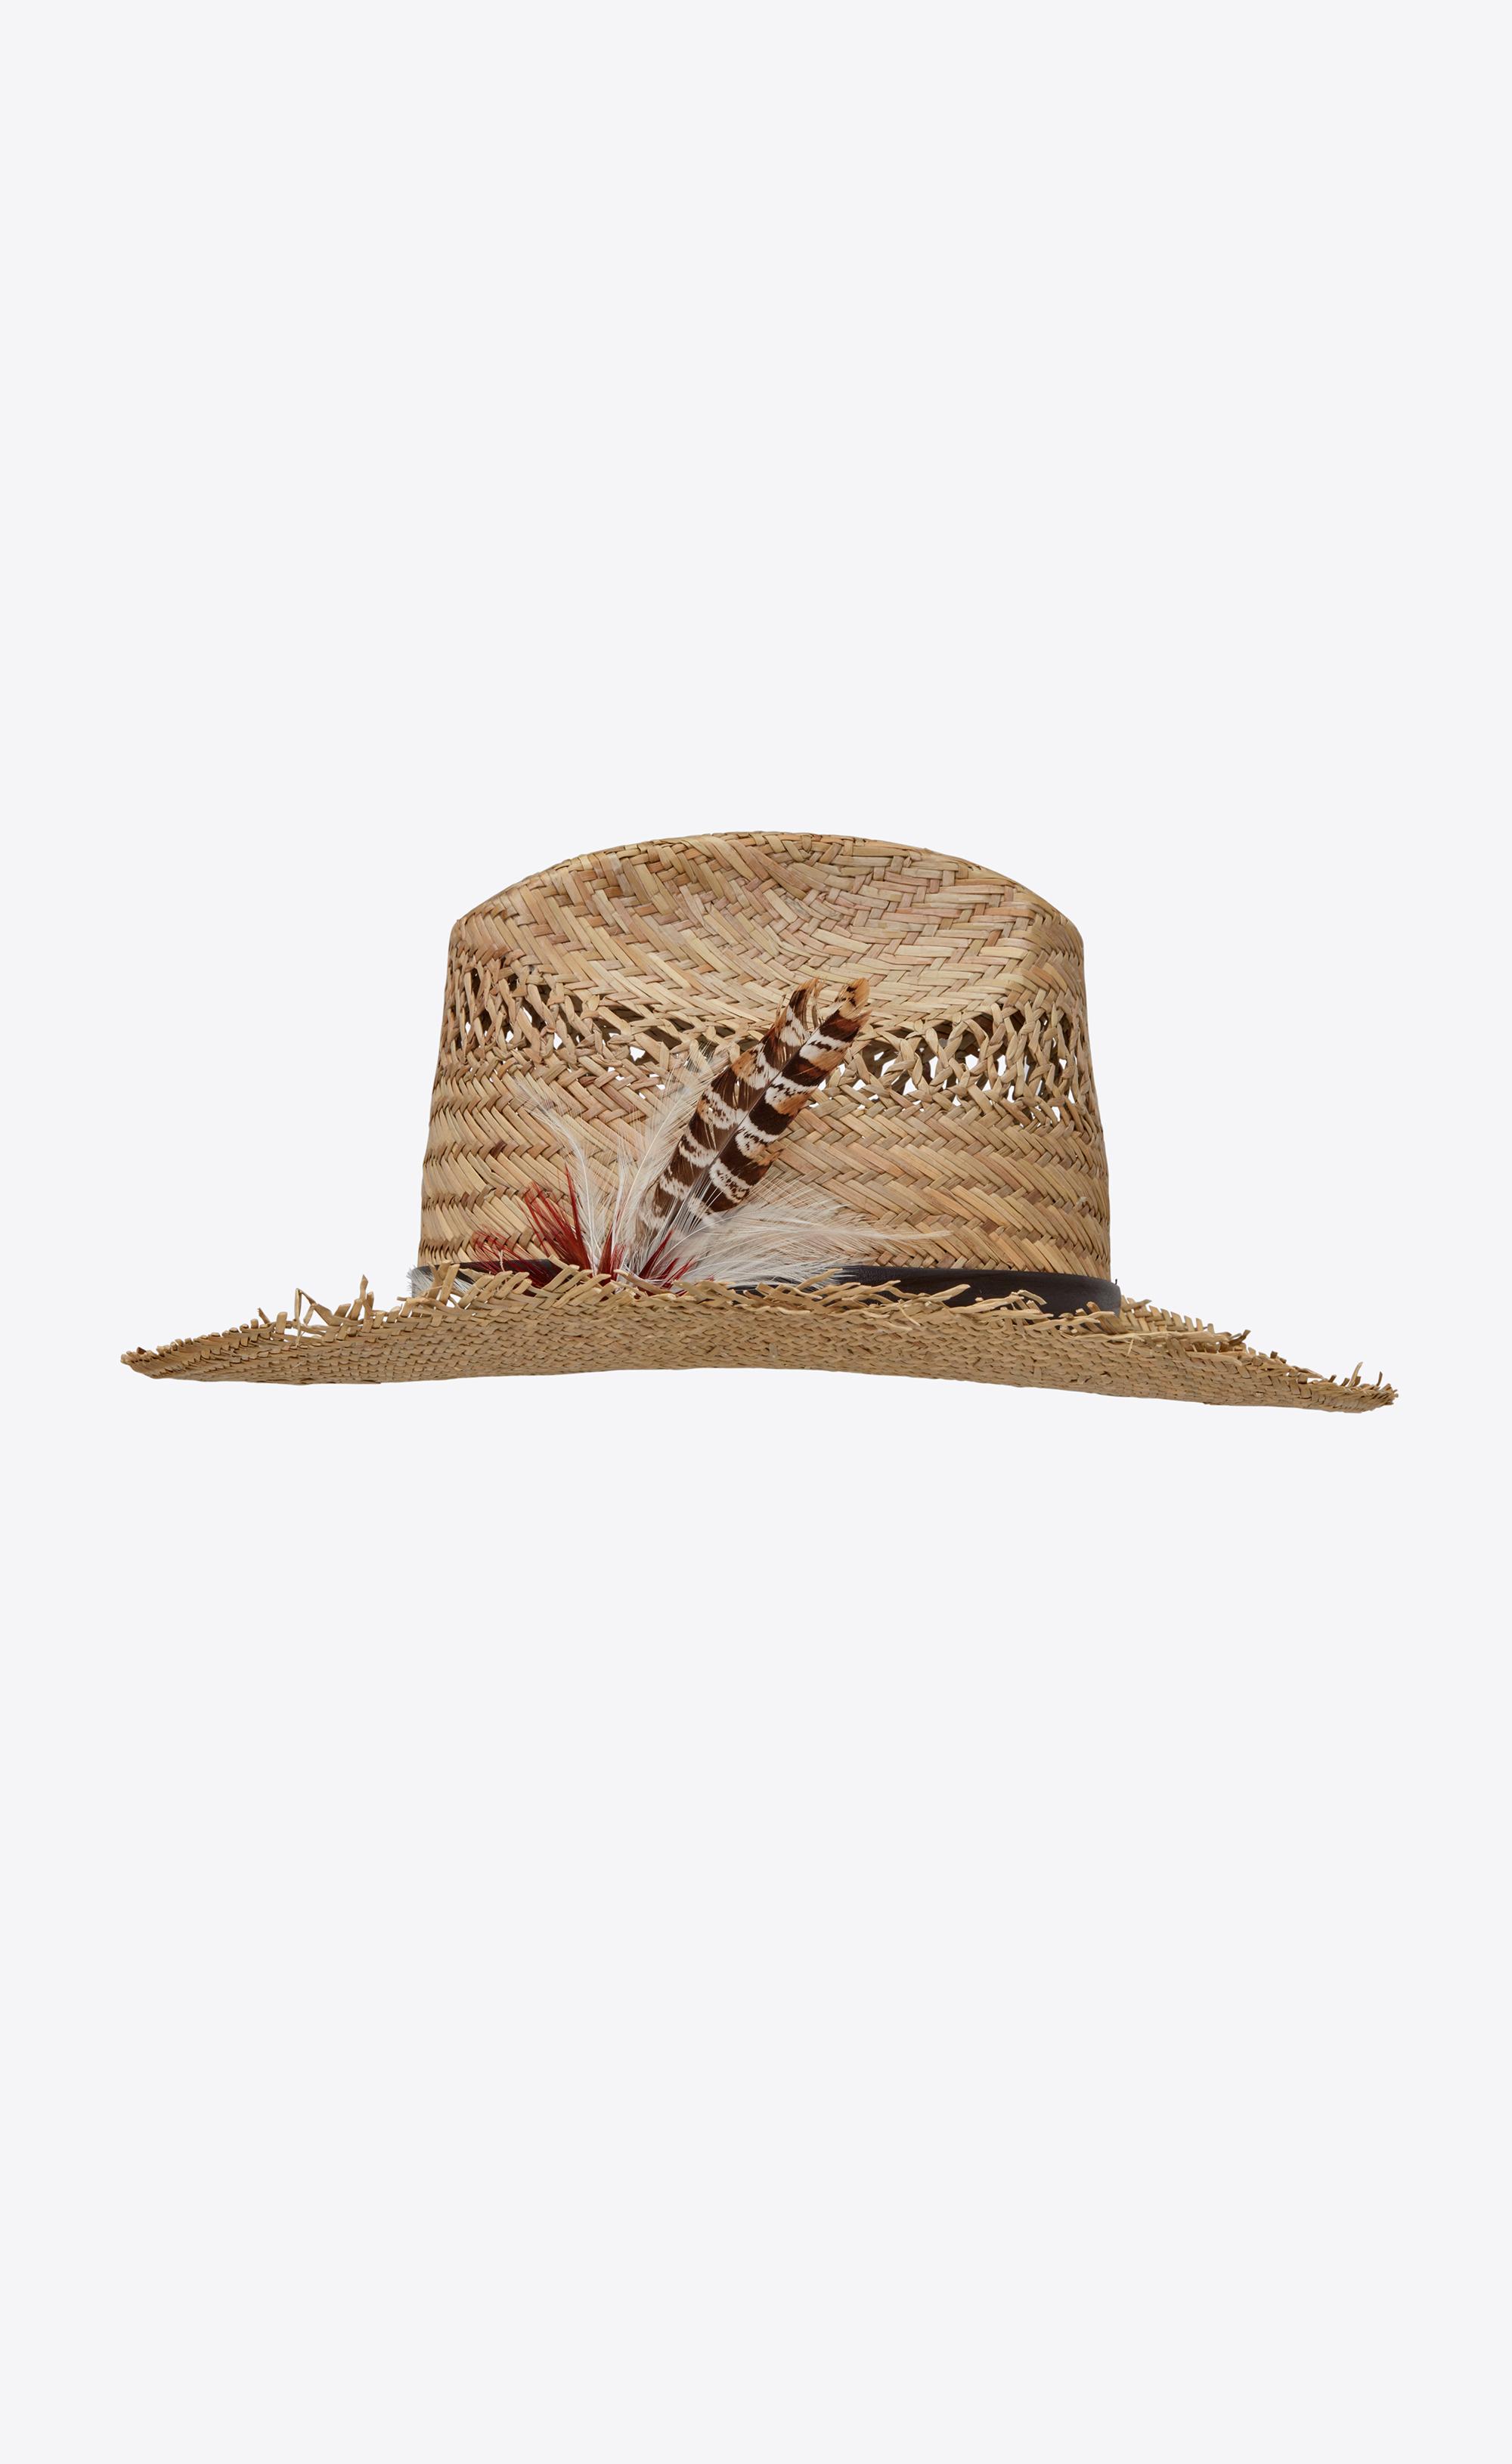 Saint Laurent Straw Cowboy Hat With Leather And Feathers in White